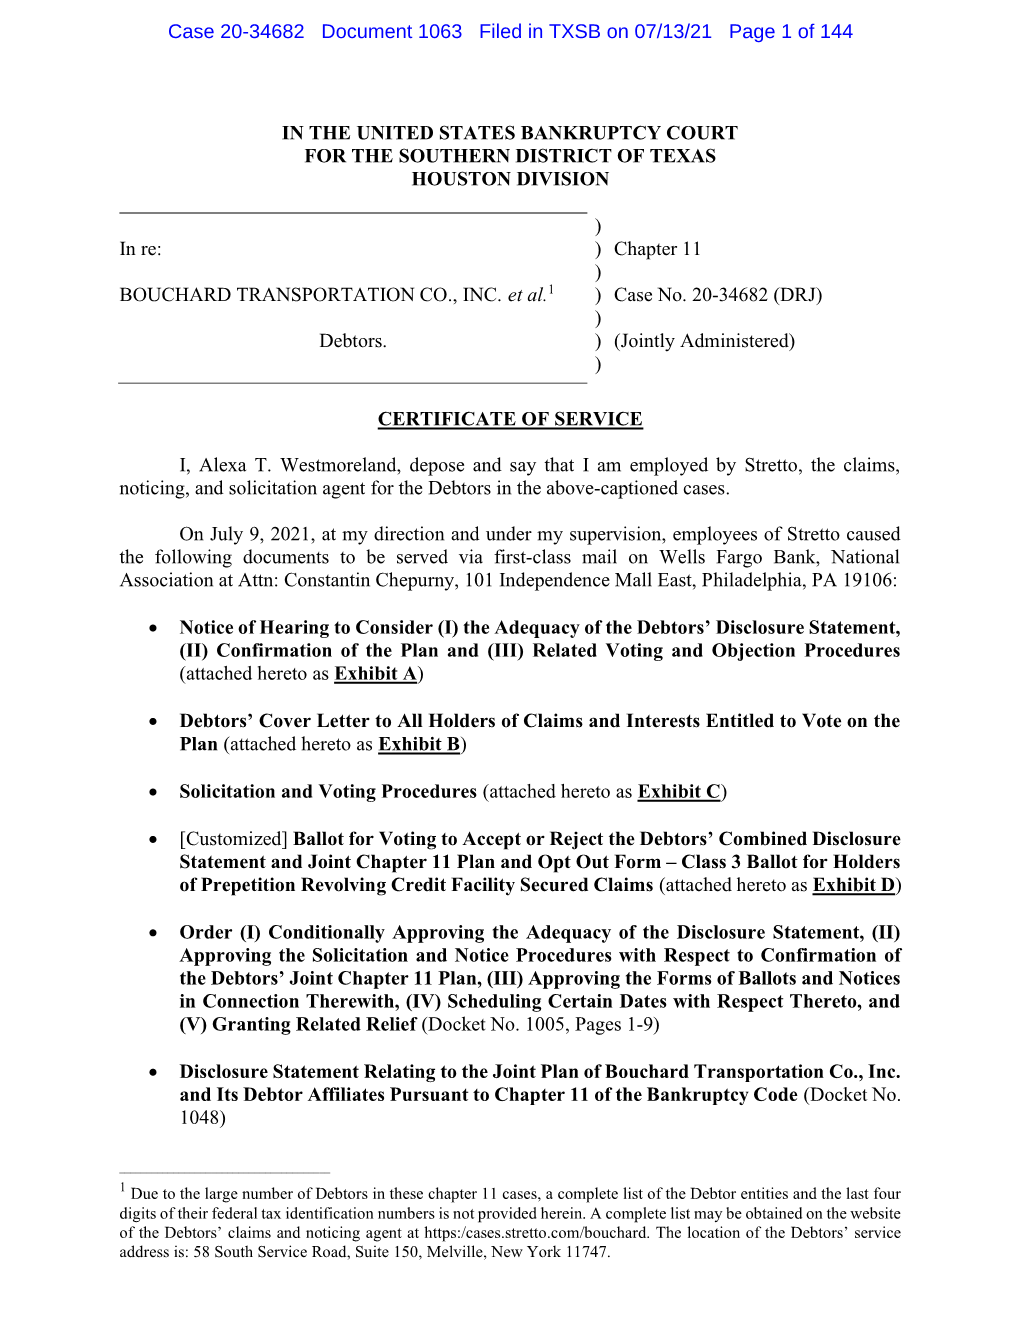 Case 20-34682 Document 1063 Filed in TXSB on 07/13/21 Page 1 of 144